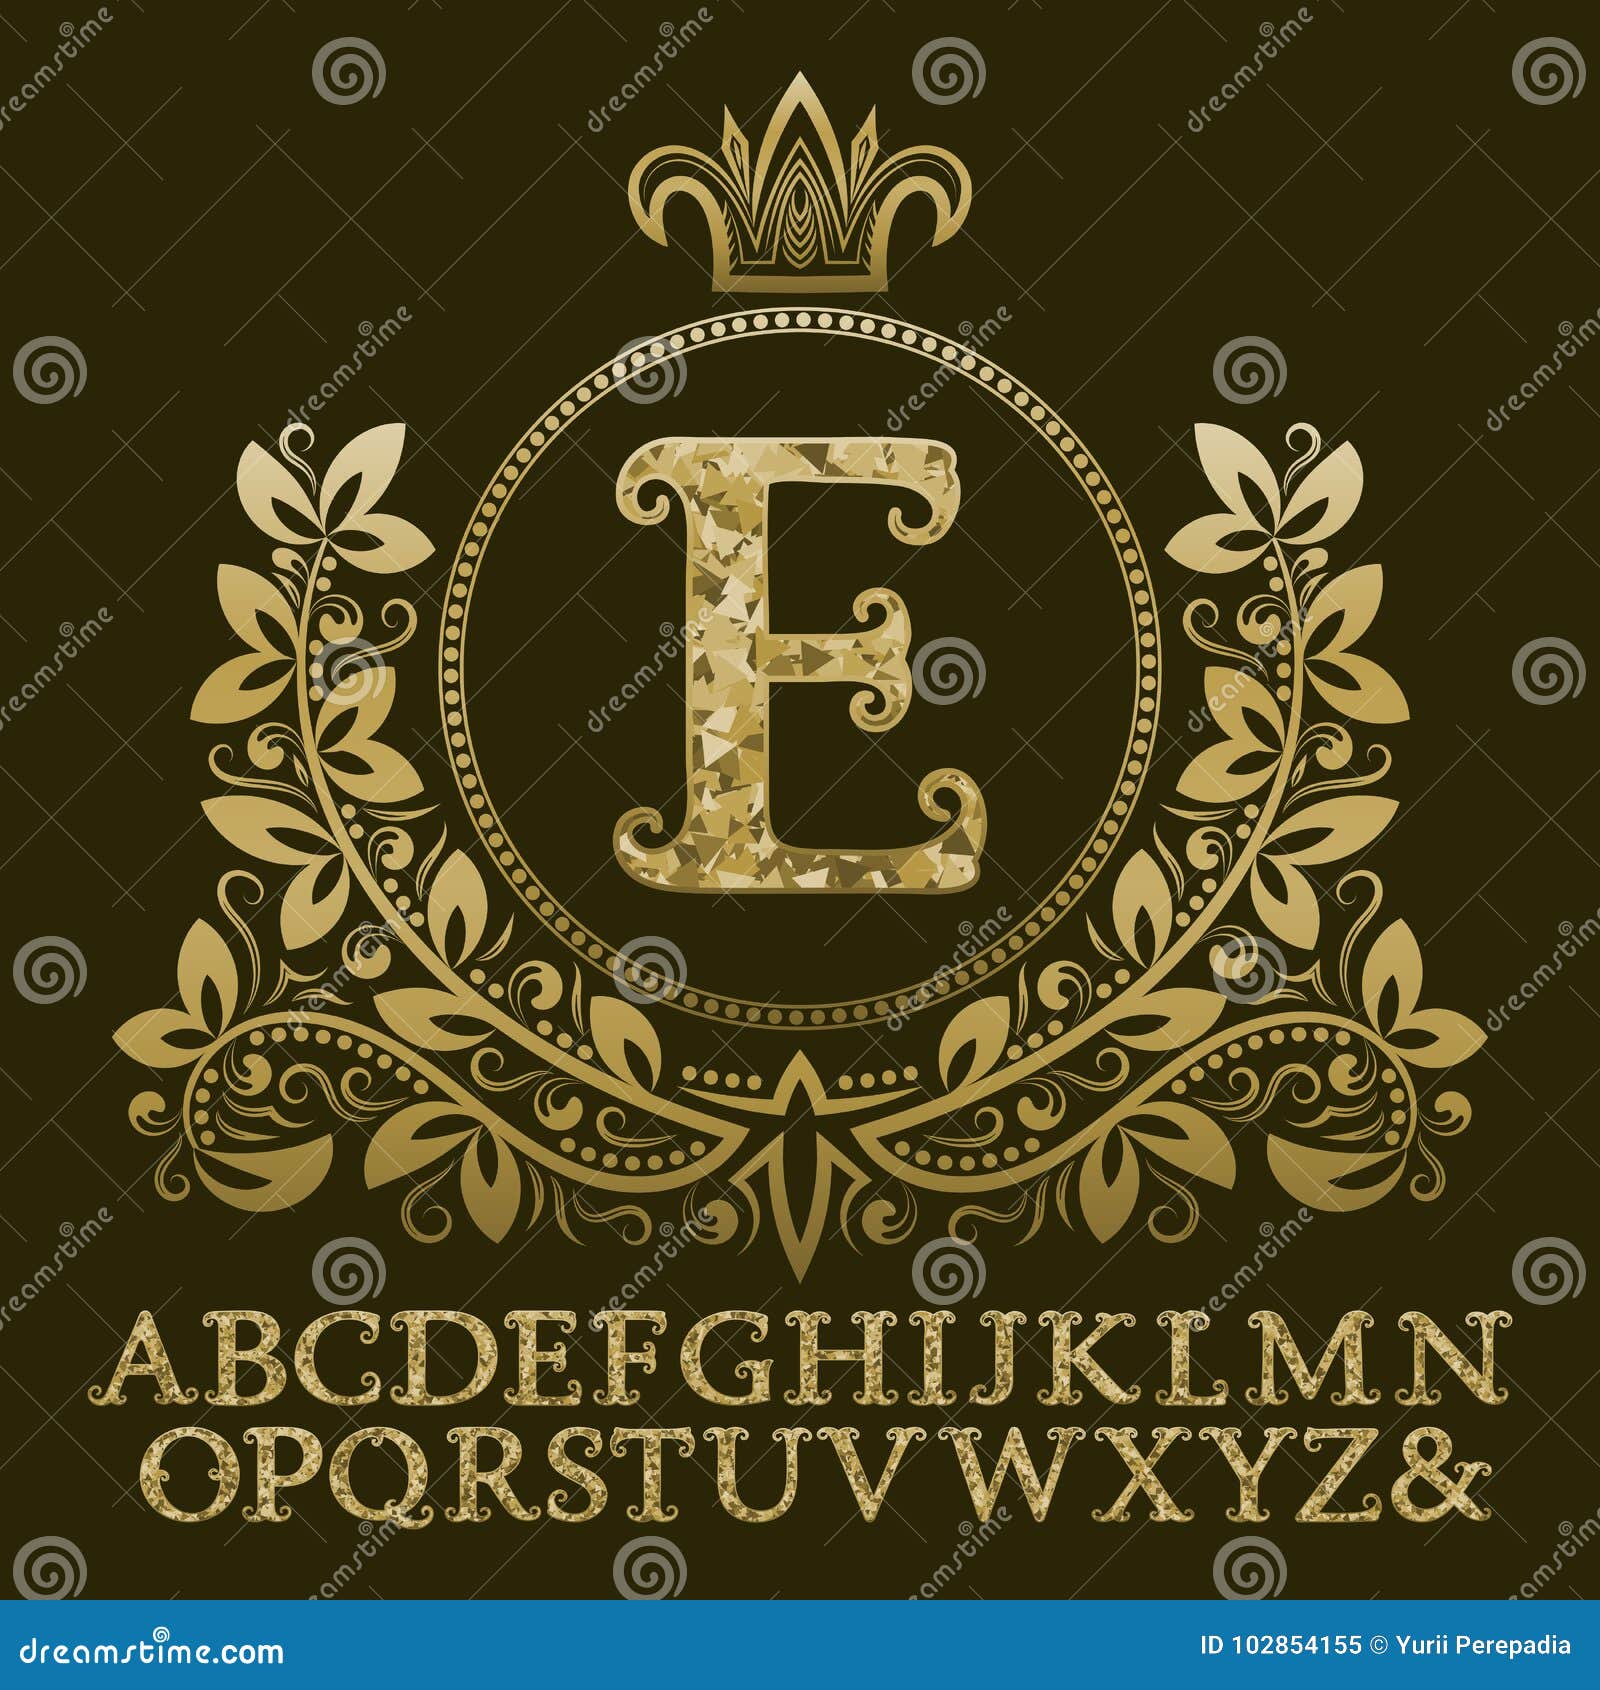 Golden Encrusted Letters and Initial Monogram in Coat of Arms Form